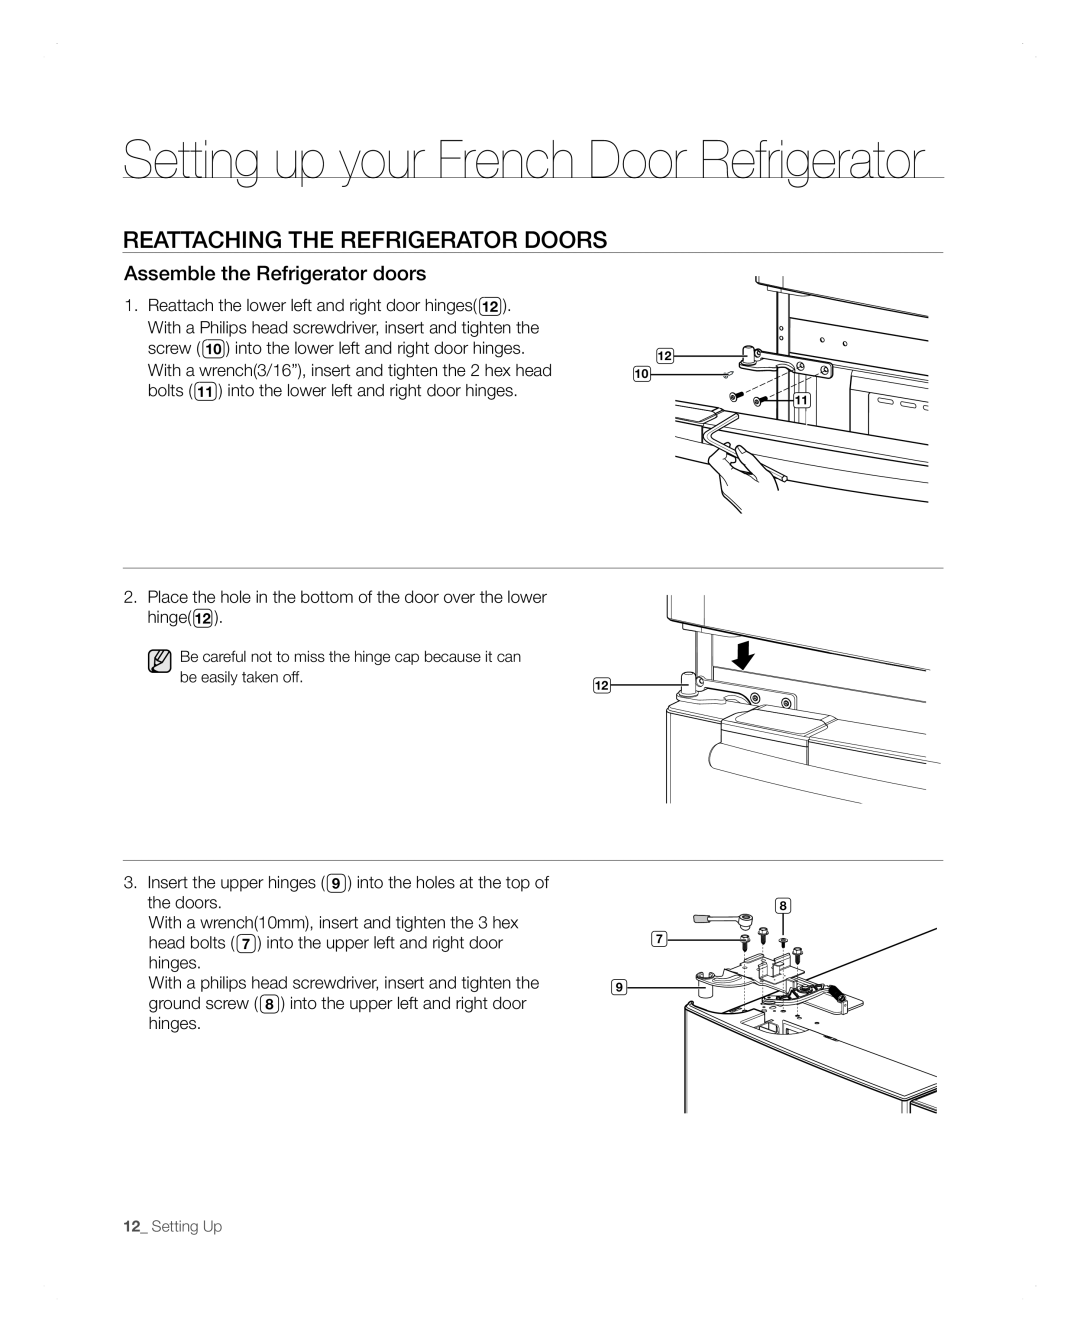 Samsung RFG297AARS user manual REAttACHinG tHE REFRiGERAtoR DooRs, Setting up your French Door Refrigerator 